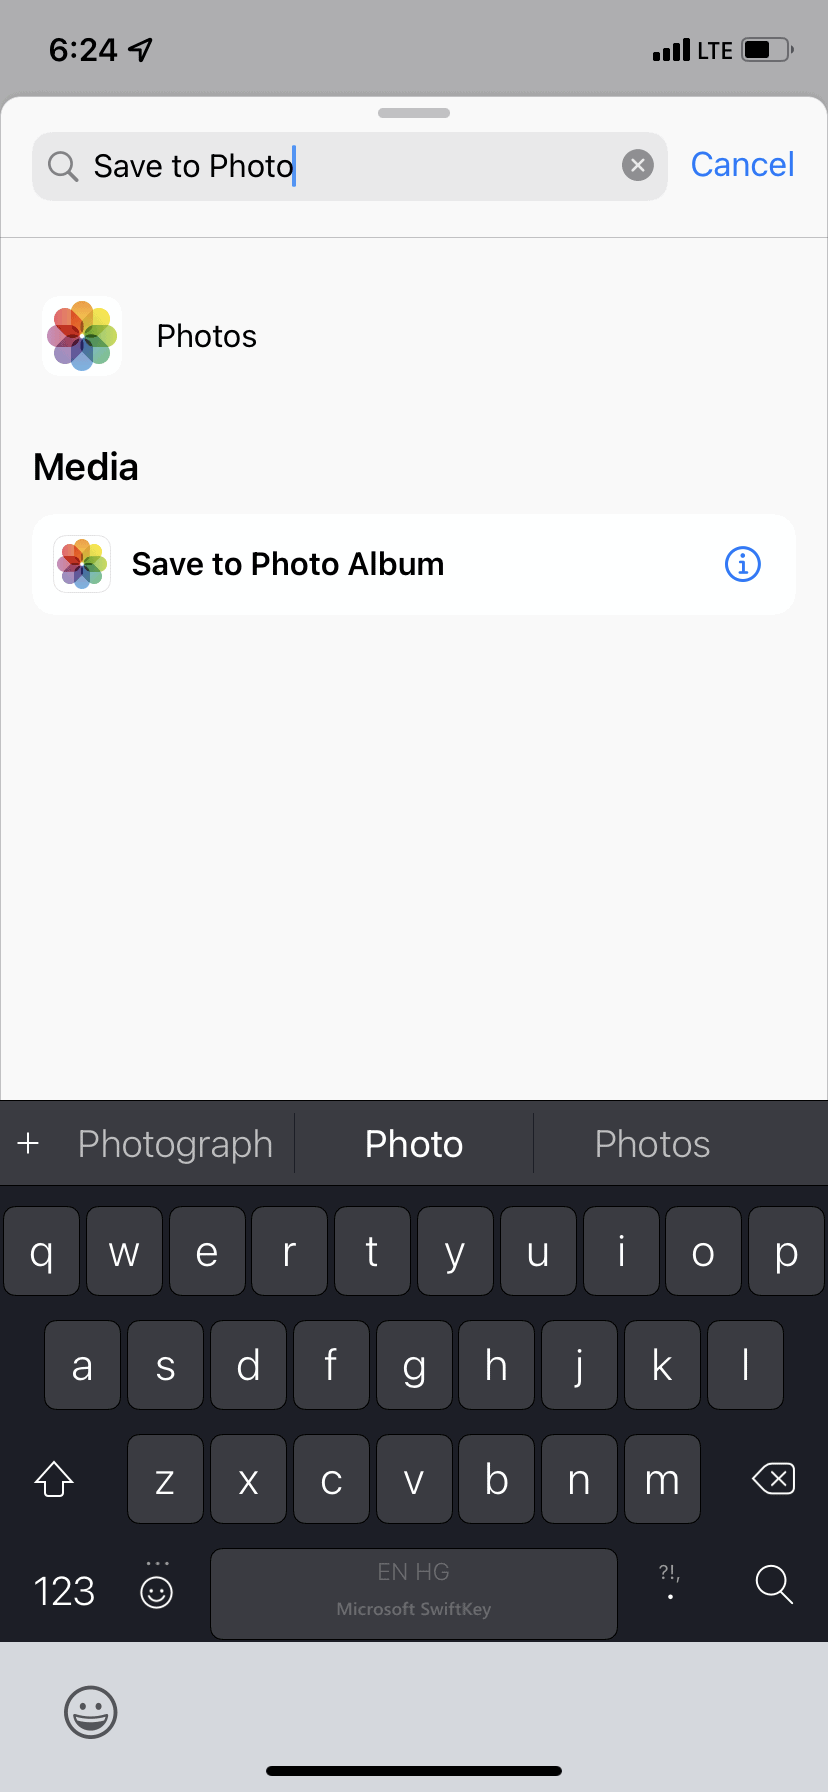 Save to Photo Album Action in iOS Shortcuts app